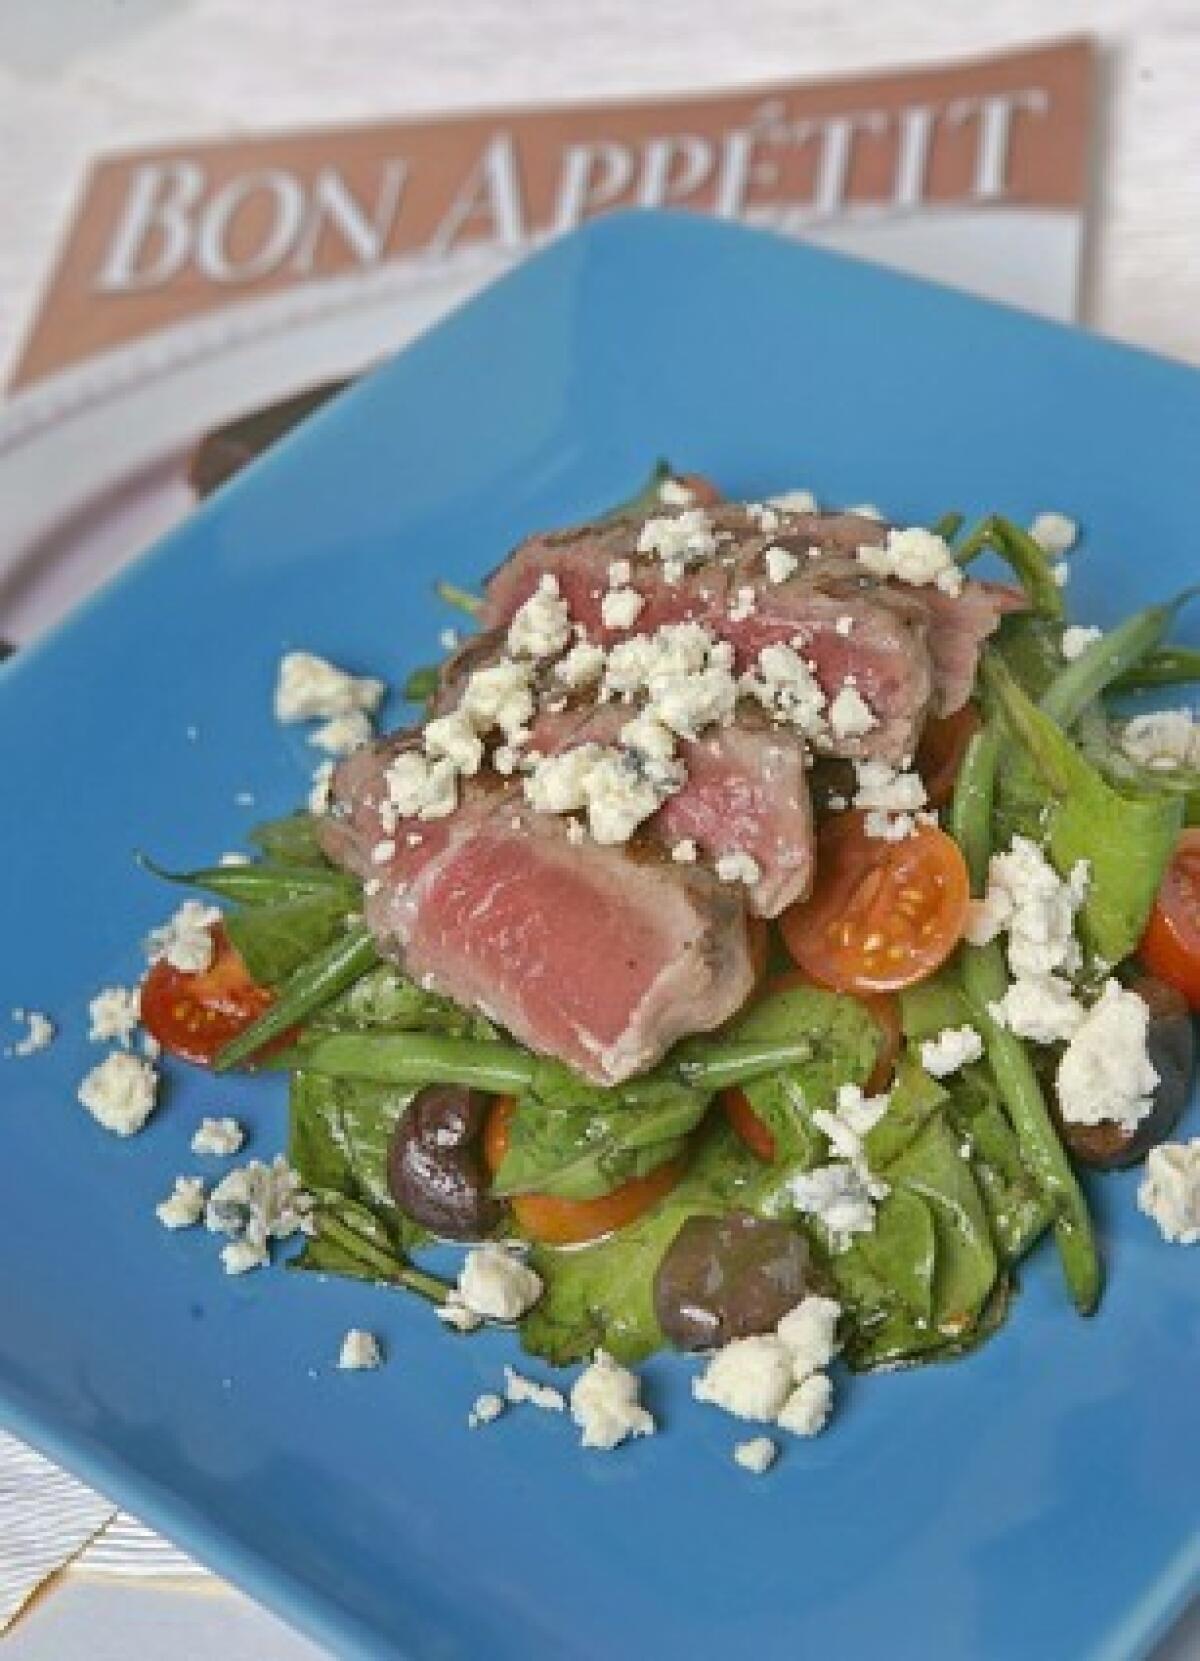 Grilled steak salad with green beans and blue cheese.